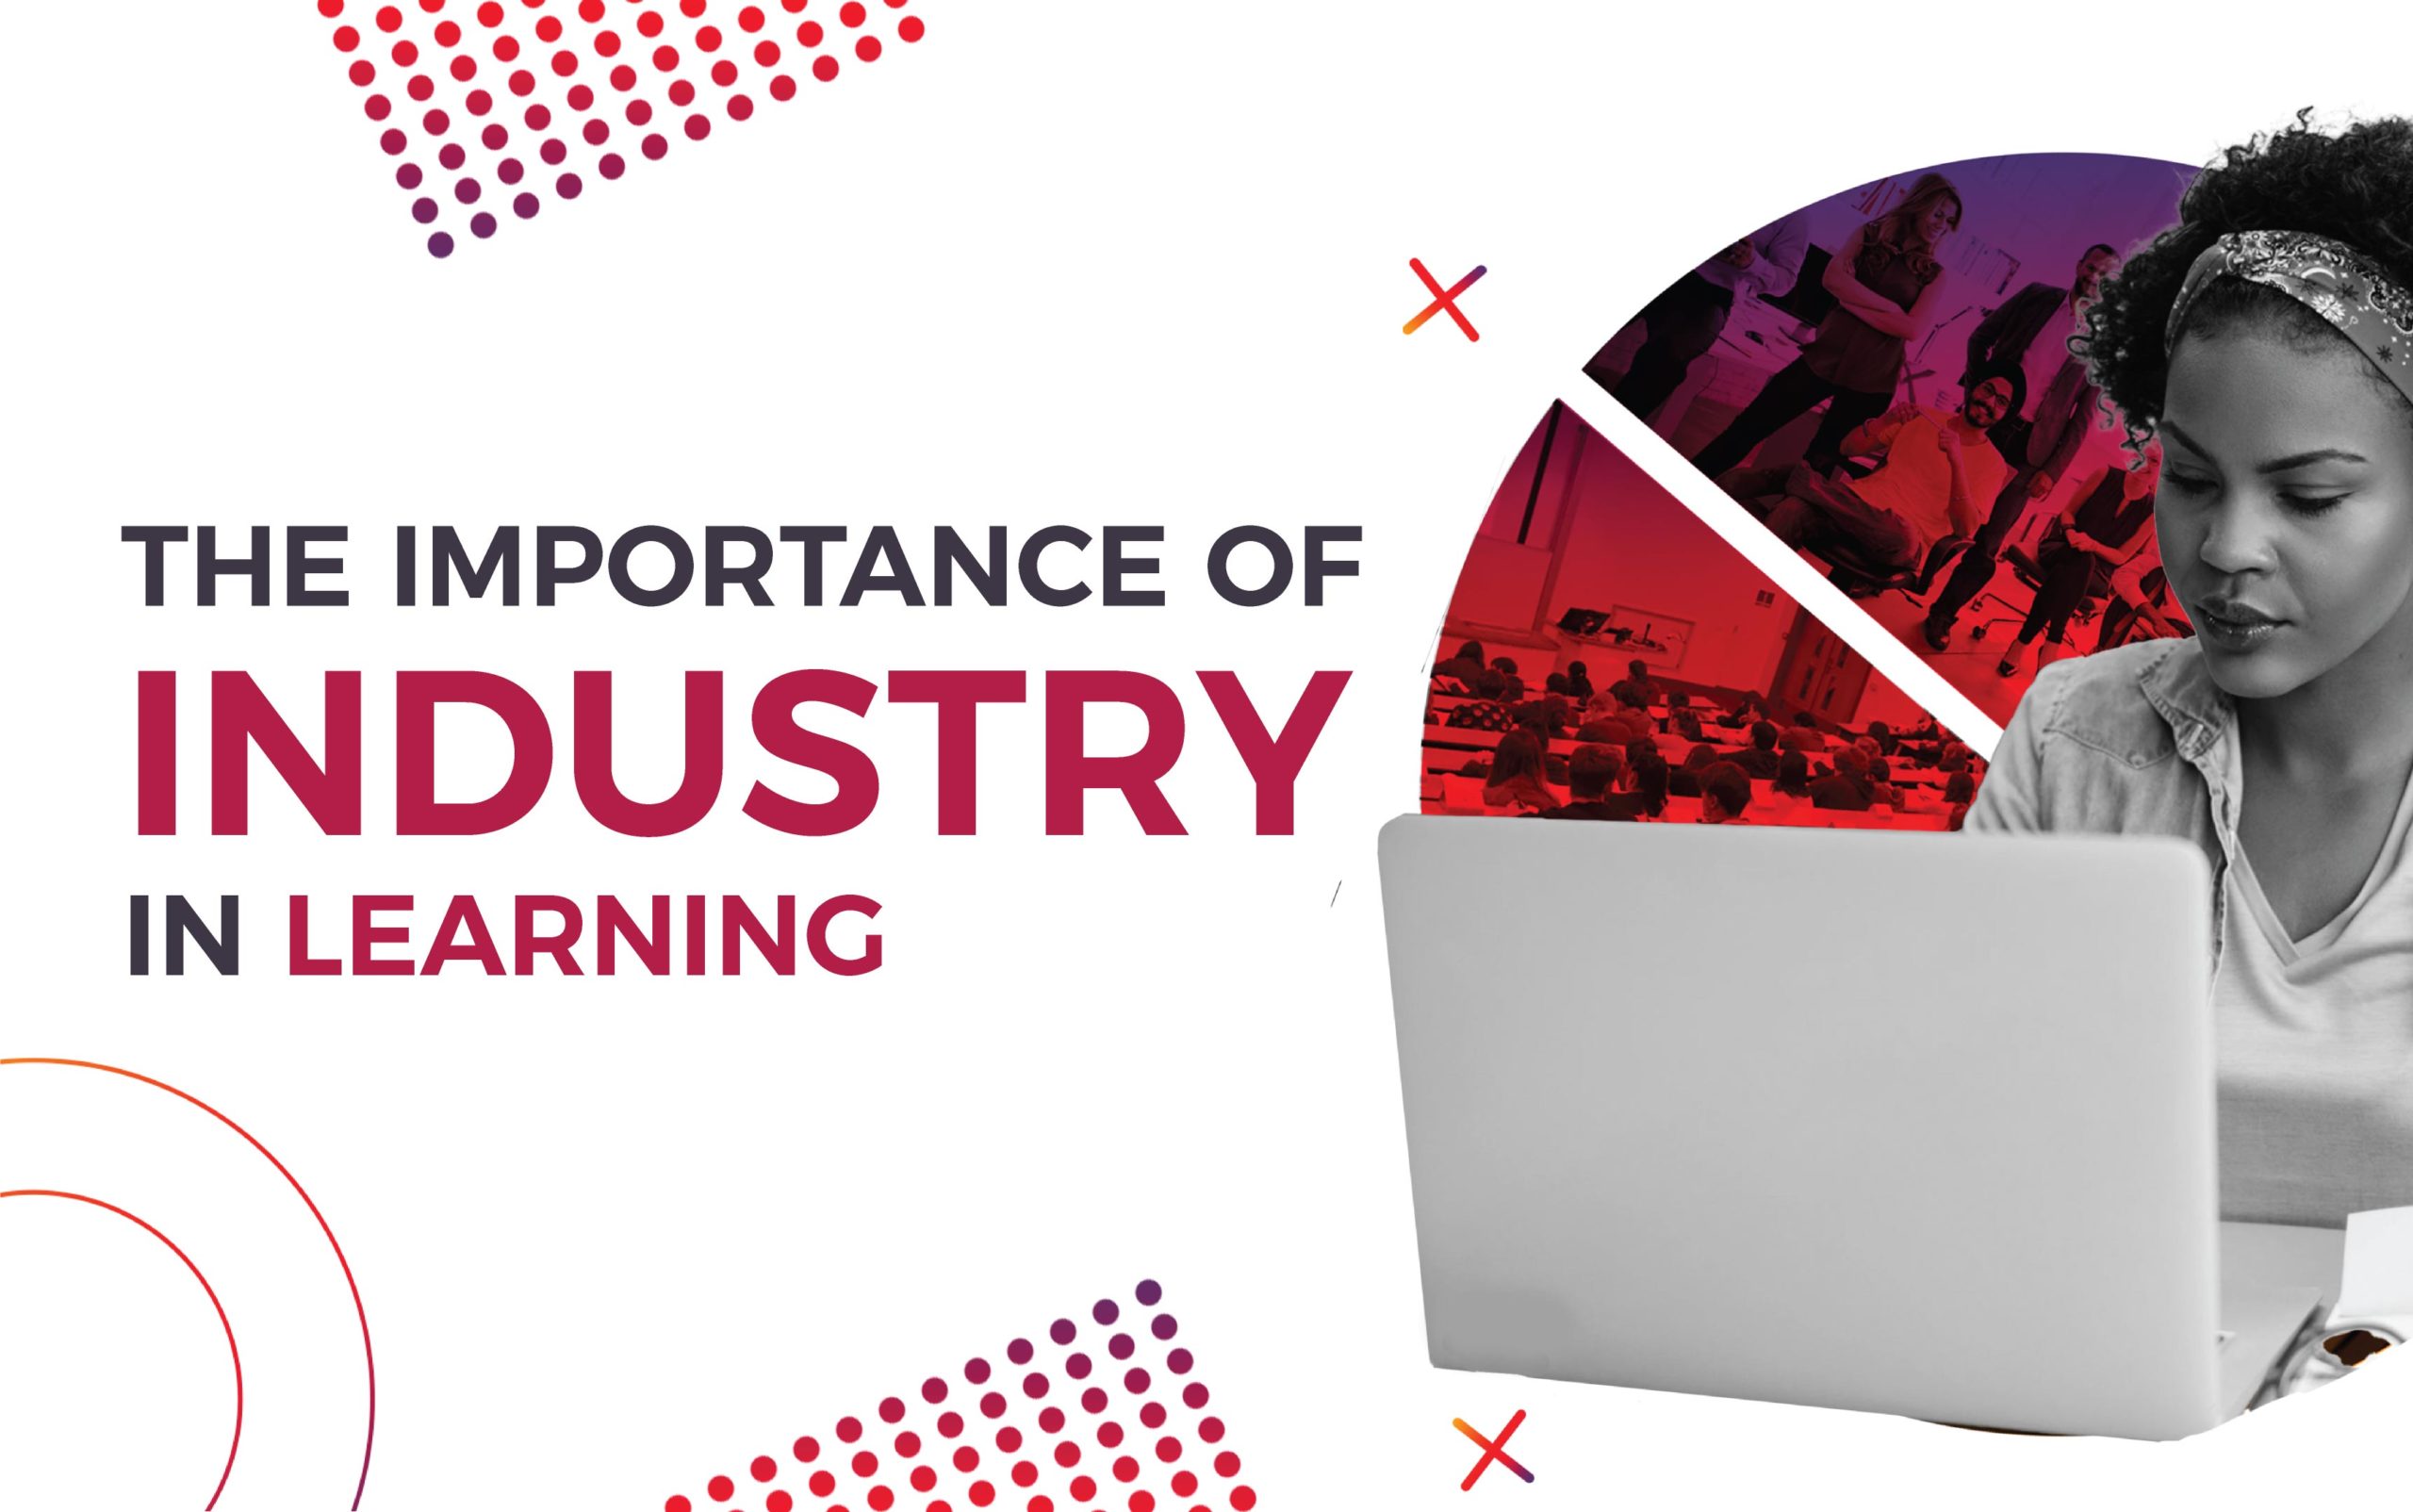 The importance of industry in learning